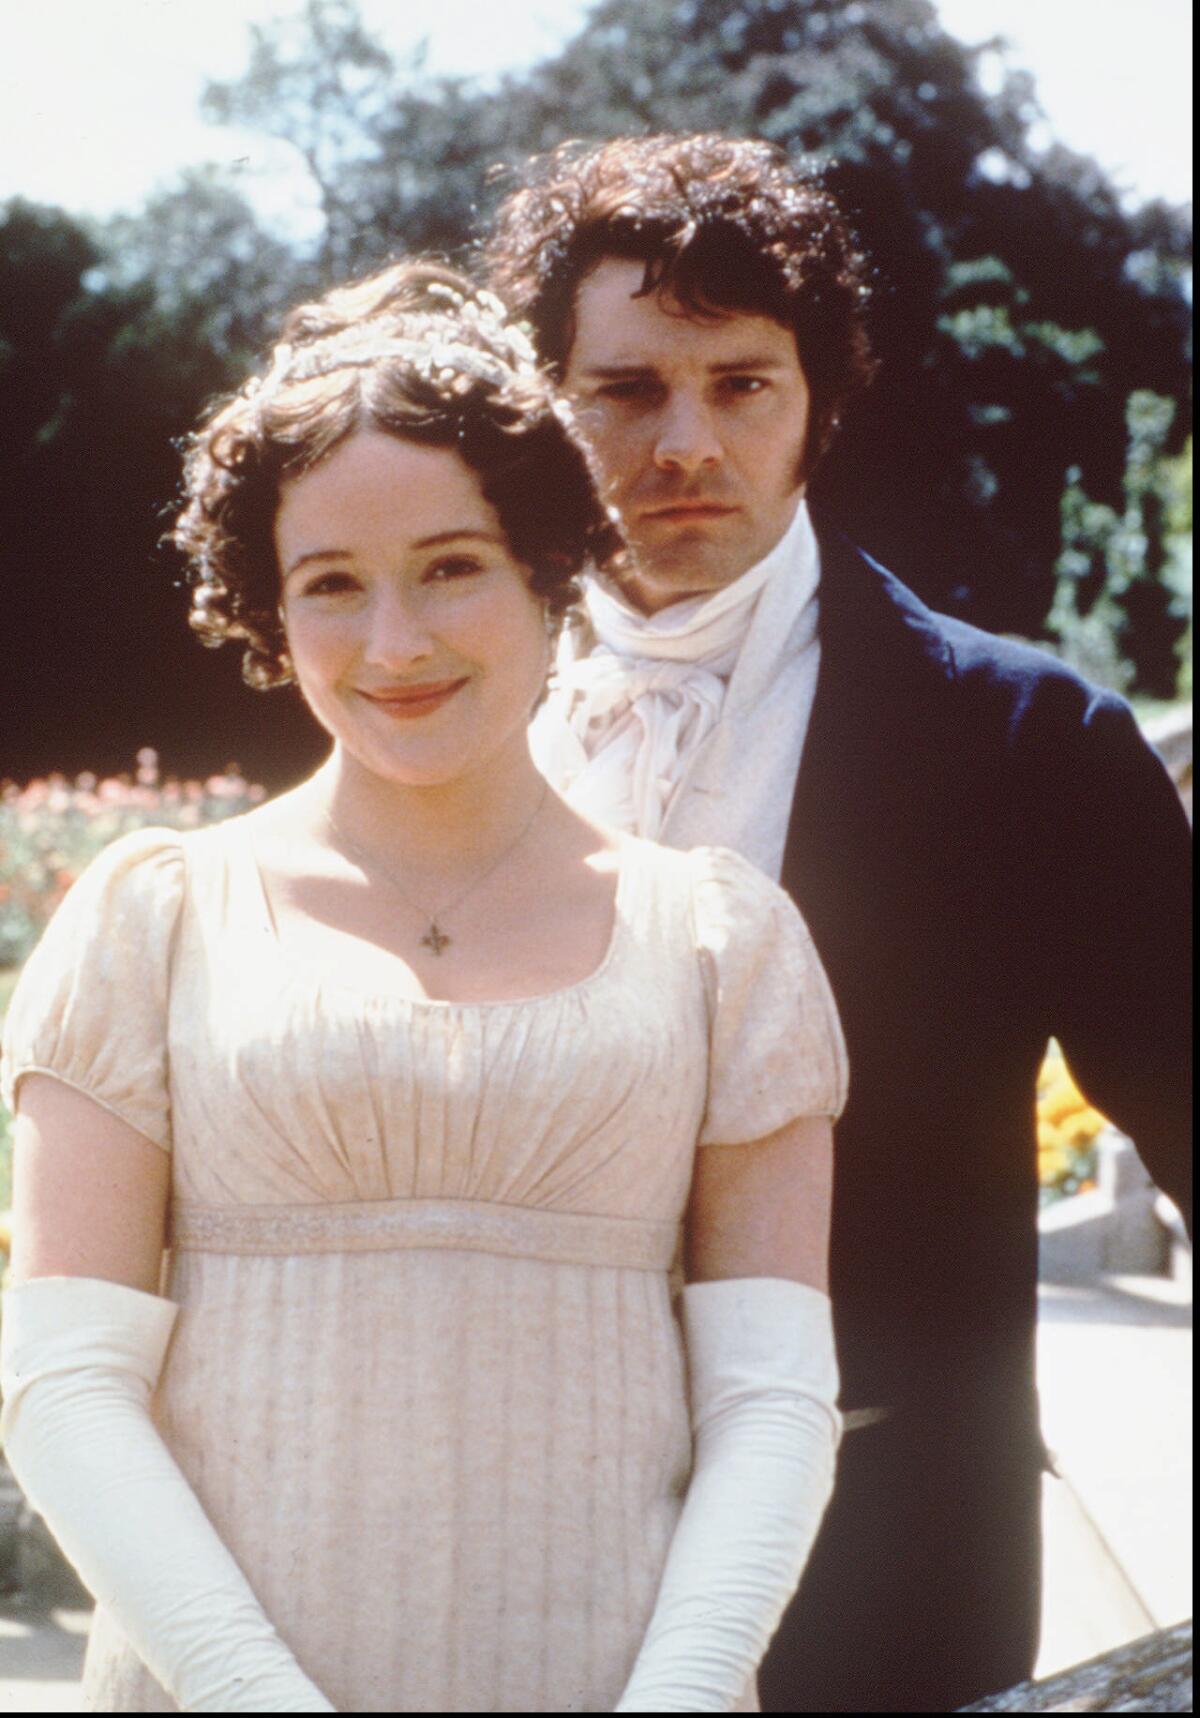 Jennifer Ehle and Colin Firth in “Pride and Prejudice.”